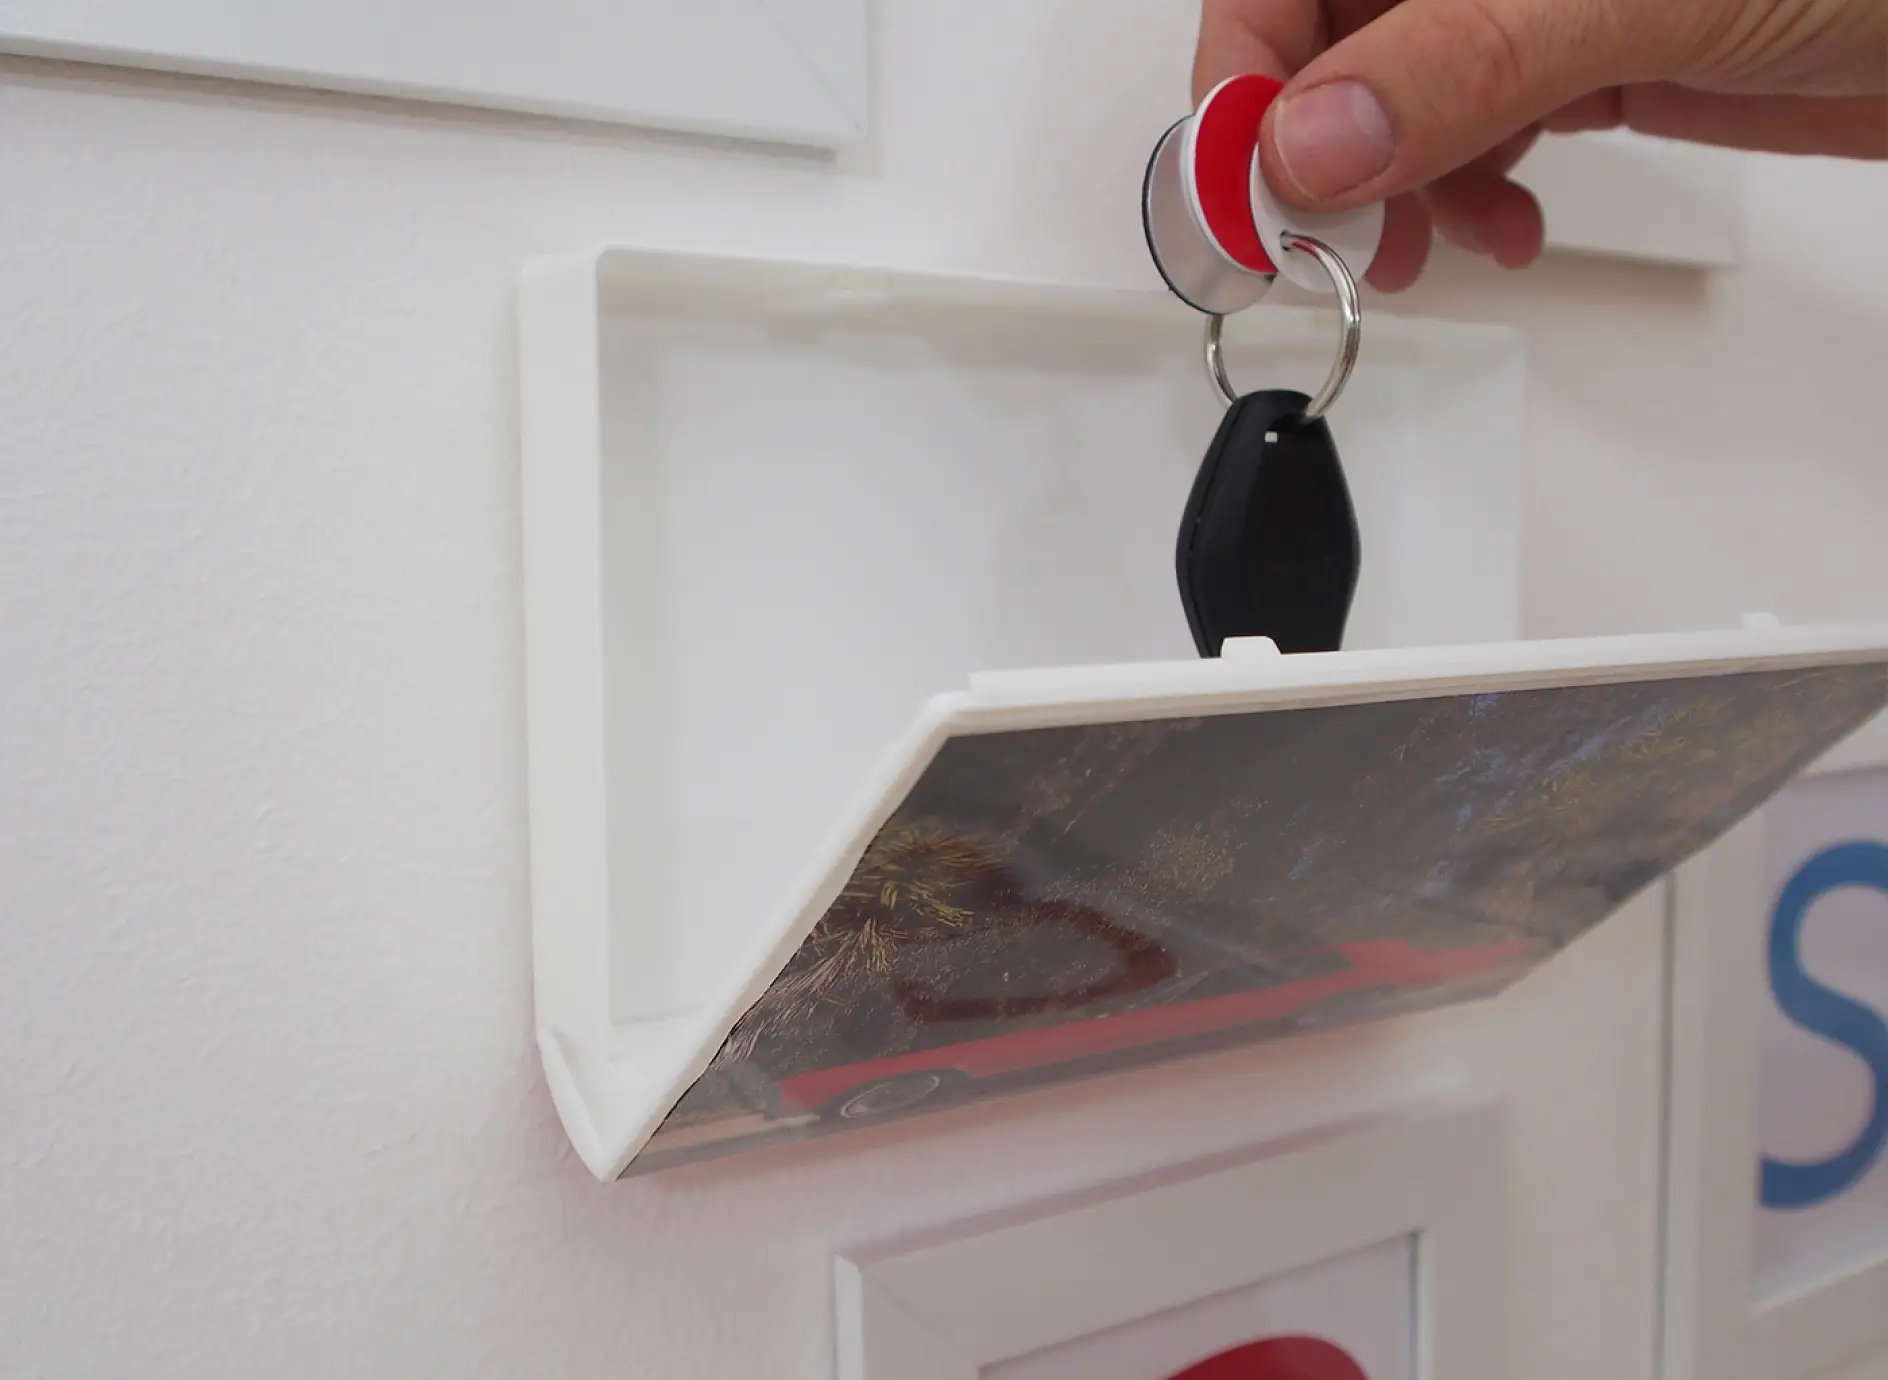 Key being dropped into storage box attached to wall with tesa® Powerbond ULTRA STRONG double-sided adhesive tape